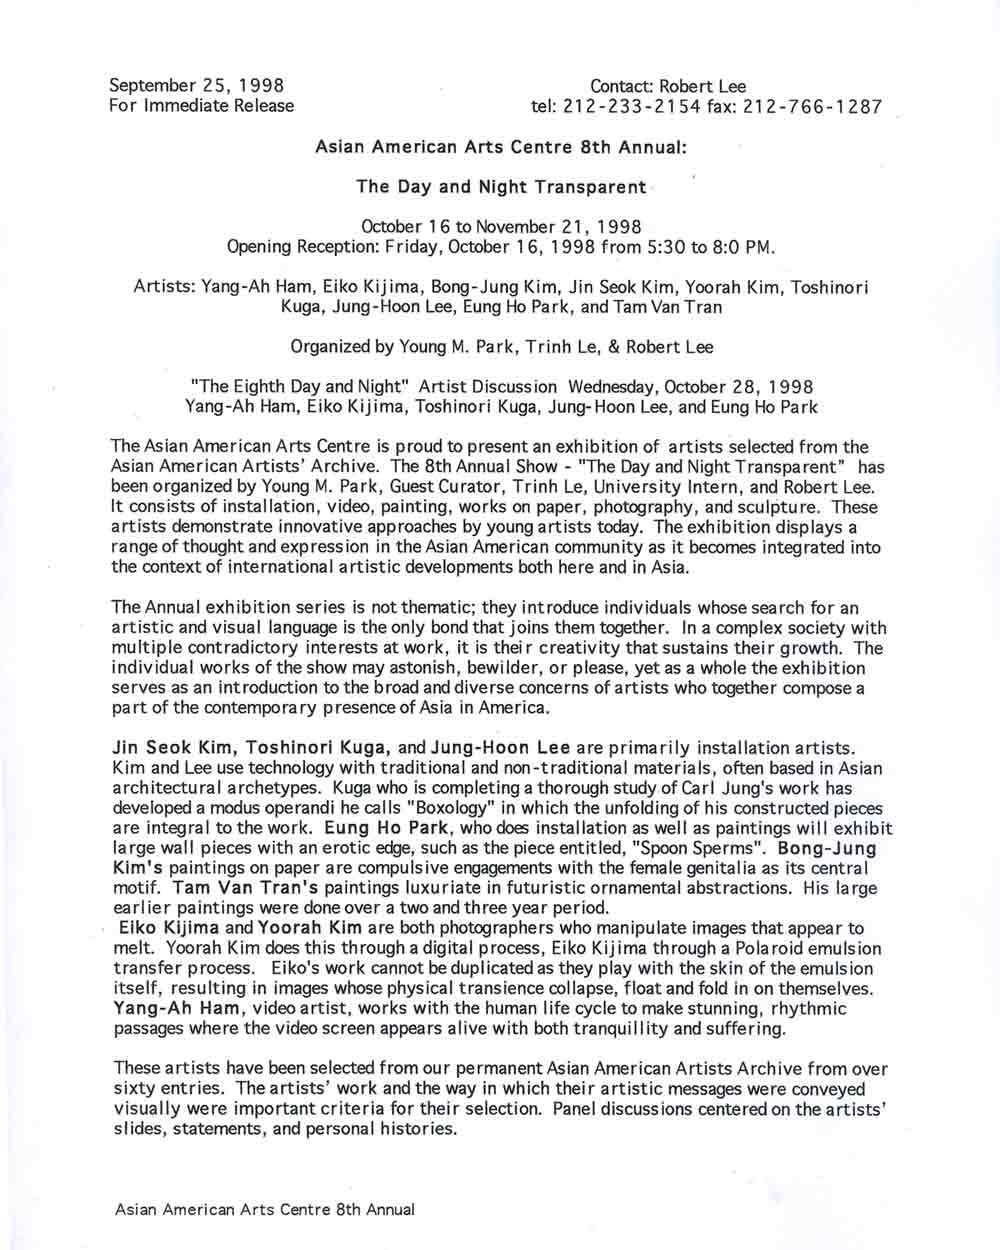 Day and Night Transparent press release, pg 1